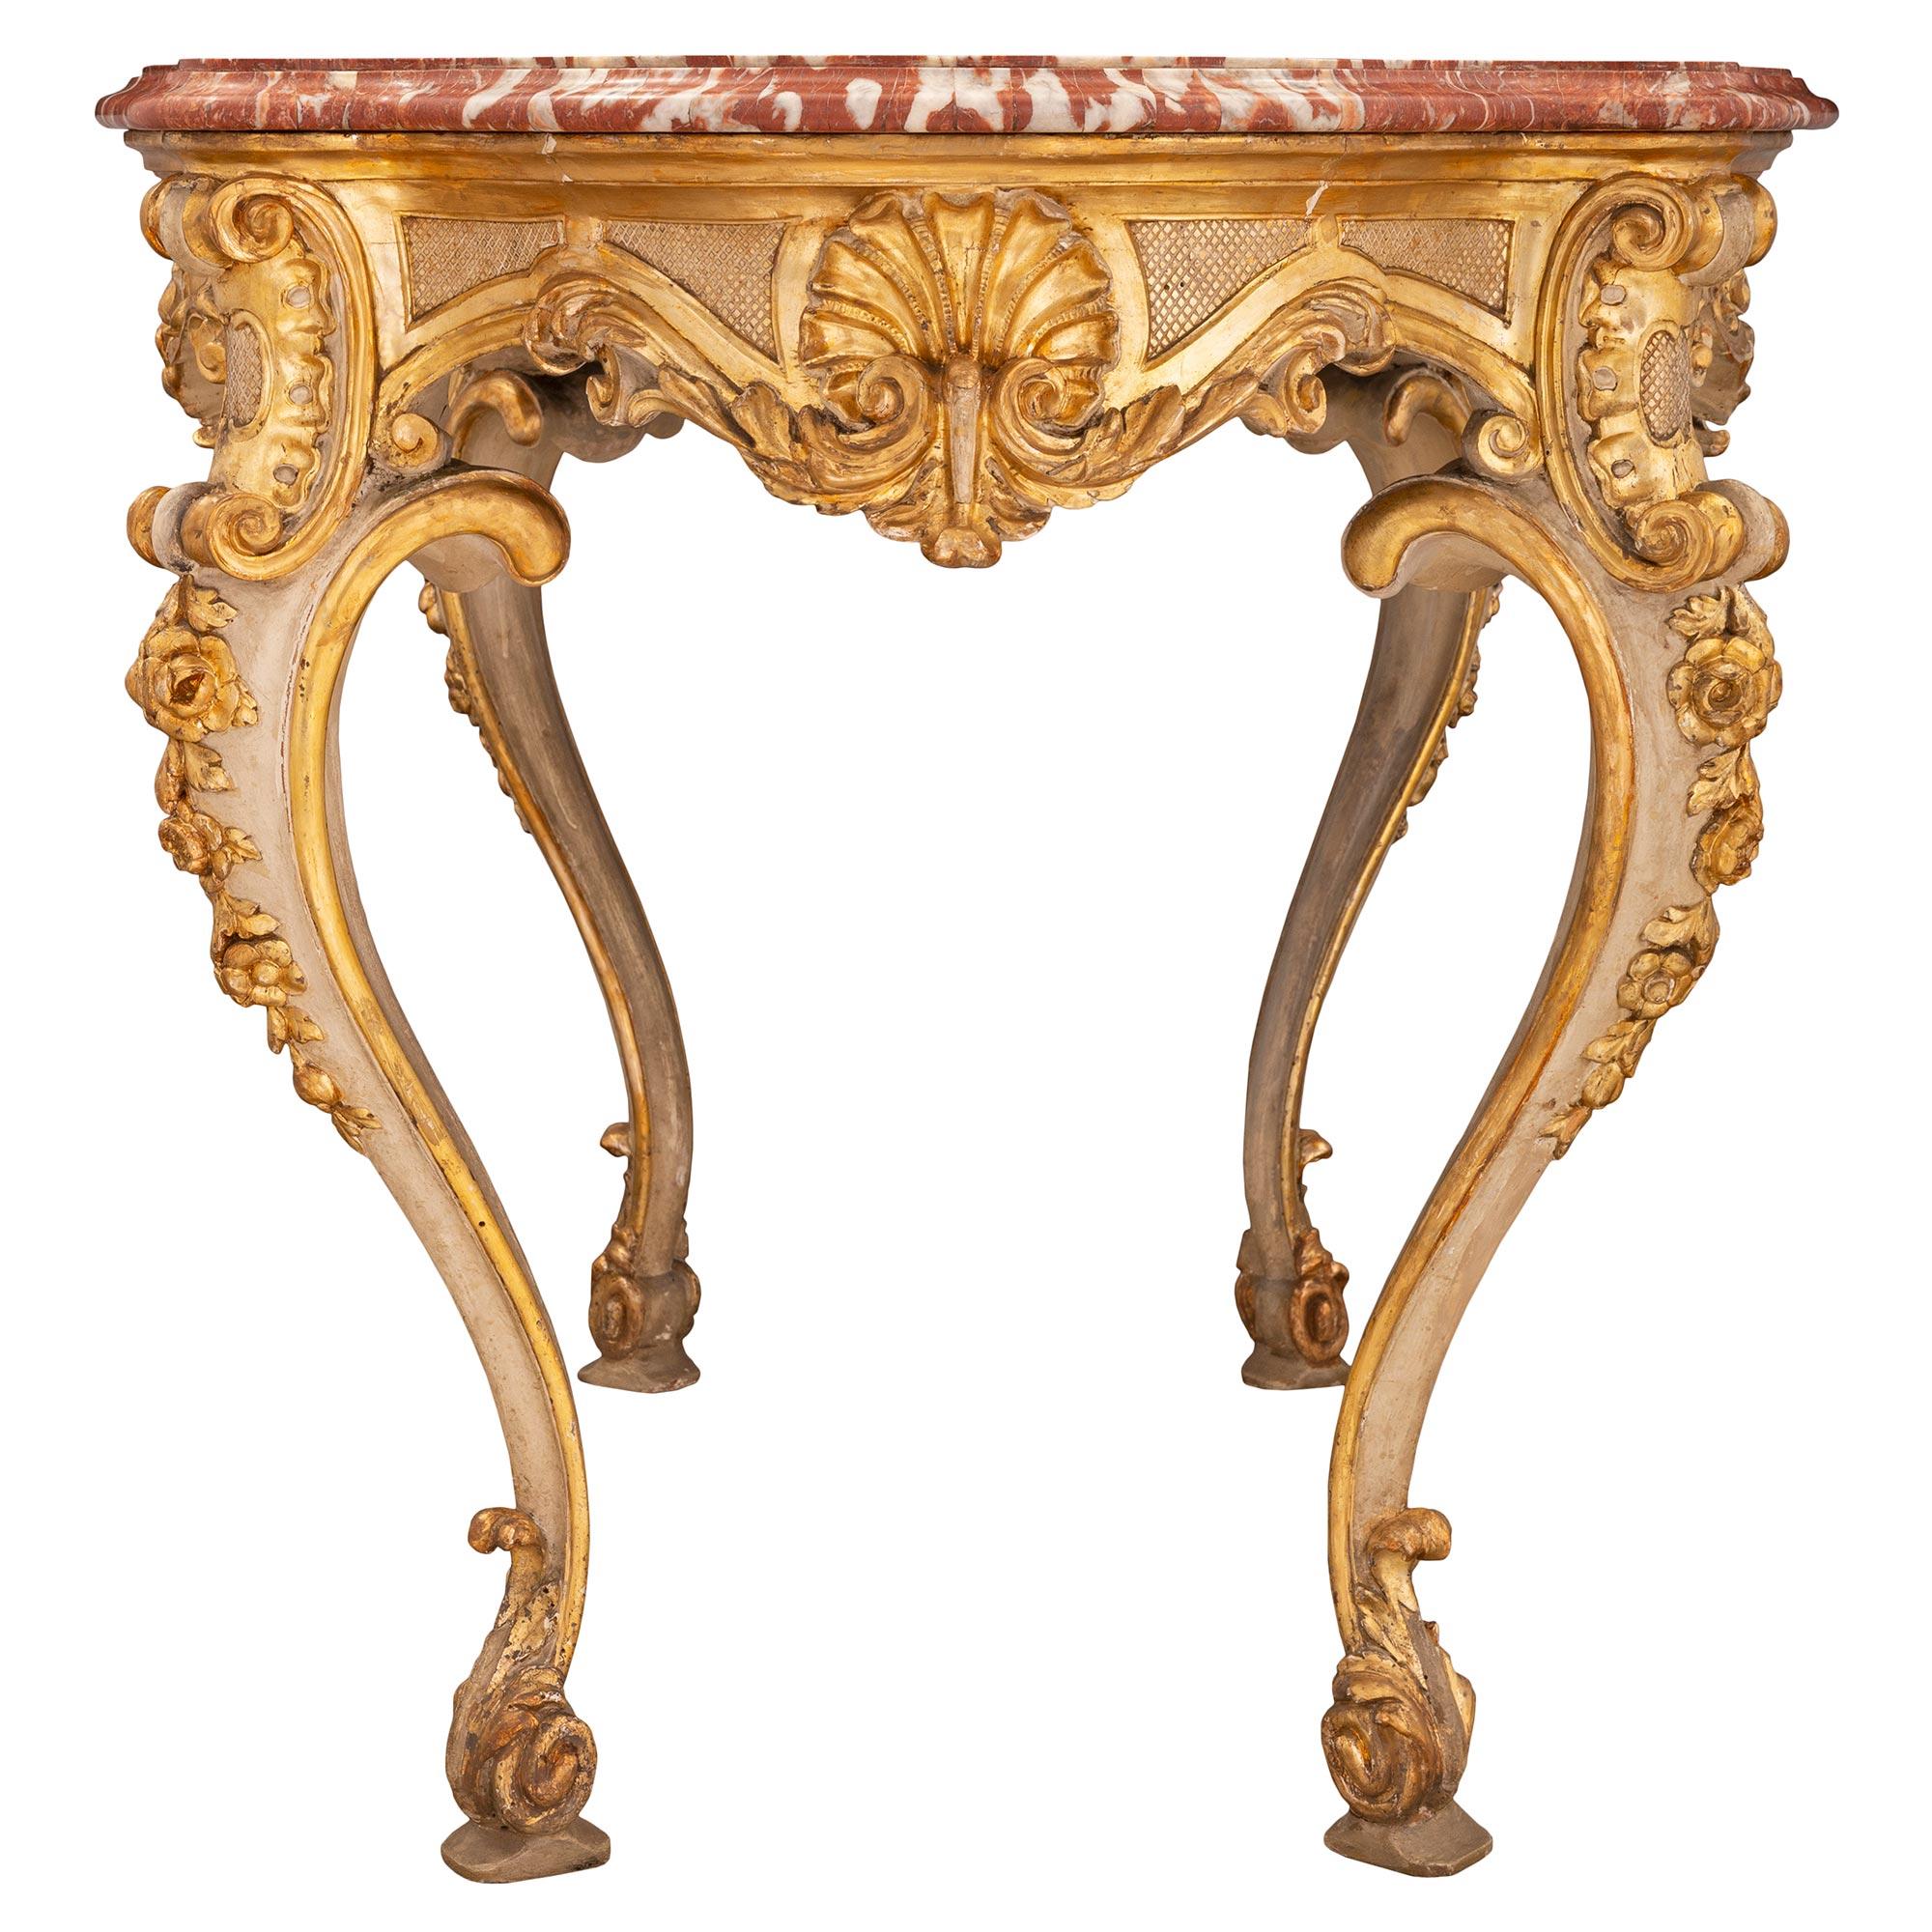 Italian Early 19th Century Mecca, Patinated, and Veneered Marble Center Table In Good Condition For Sale In West Palm Beach, FL